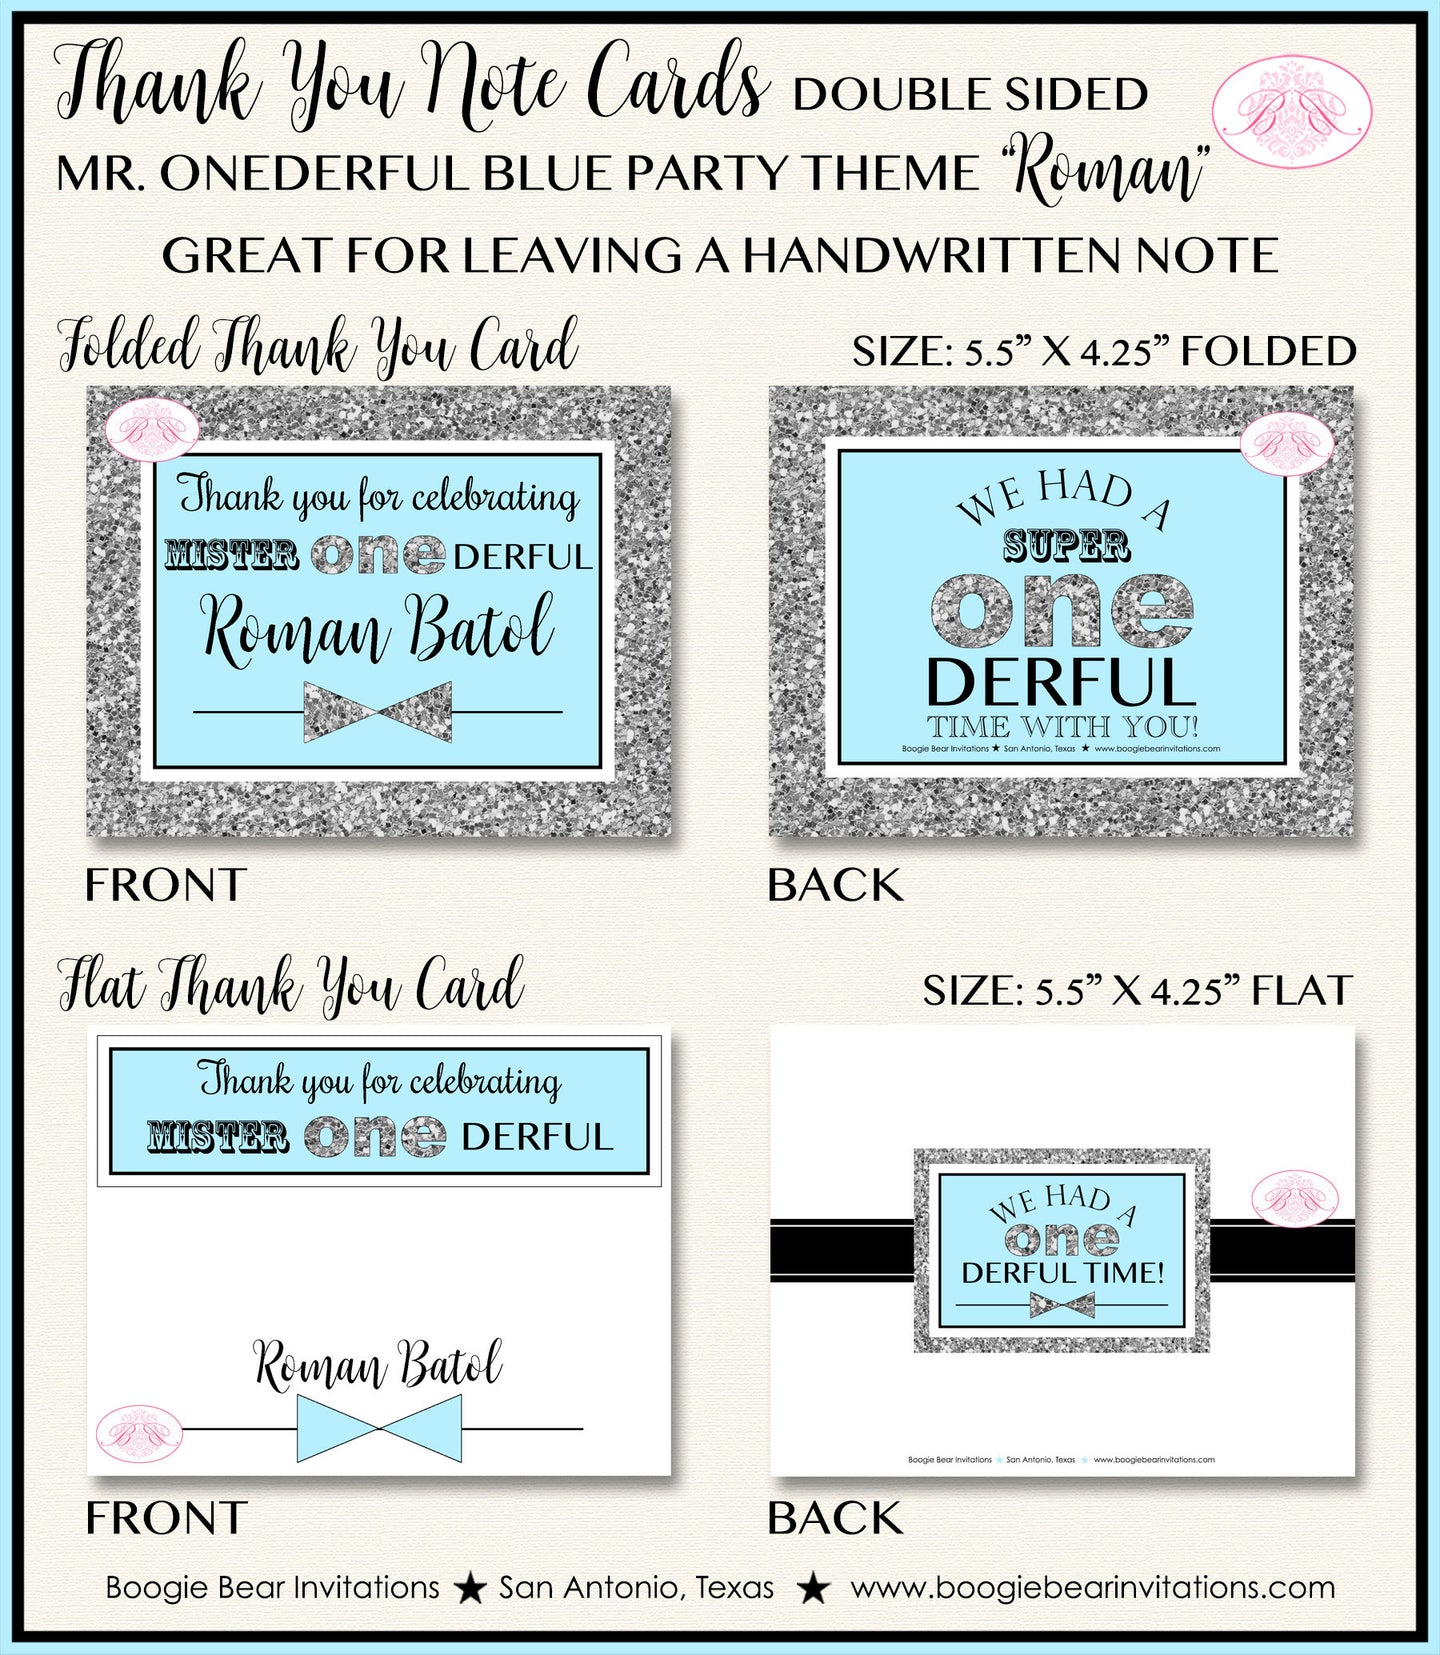 Mr. Wonderful Party Thank You Card Birthday Little Bow Tie Boy Blue Silver ONE Onederful 1st Boogie Bear Invitations Roman Theme Printed